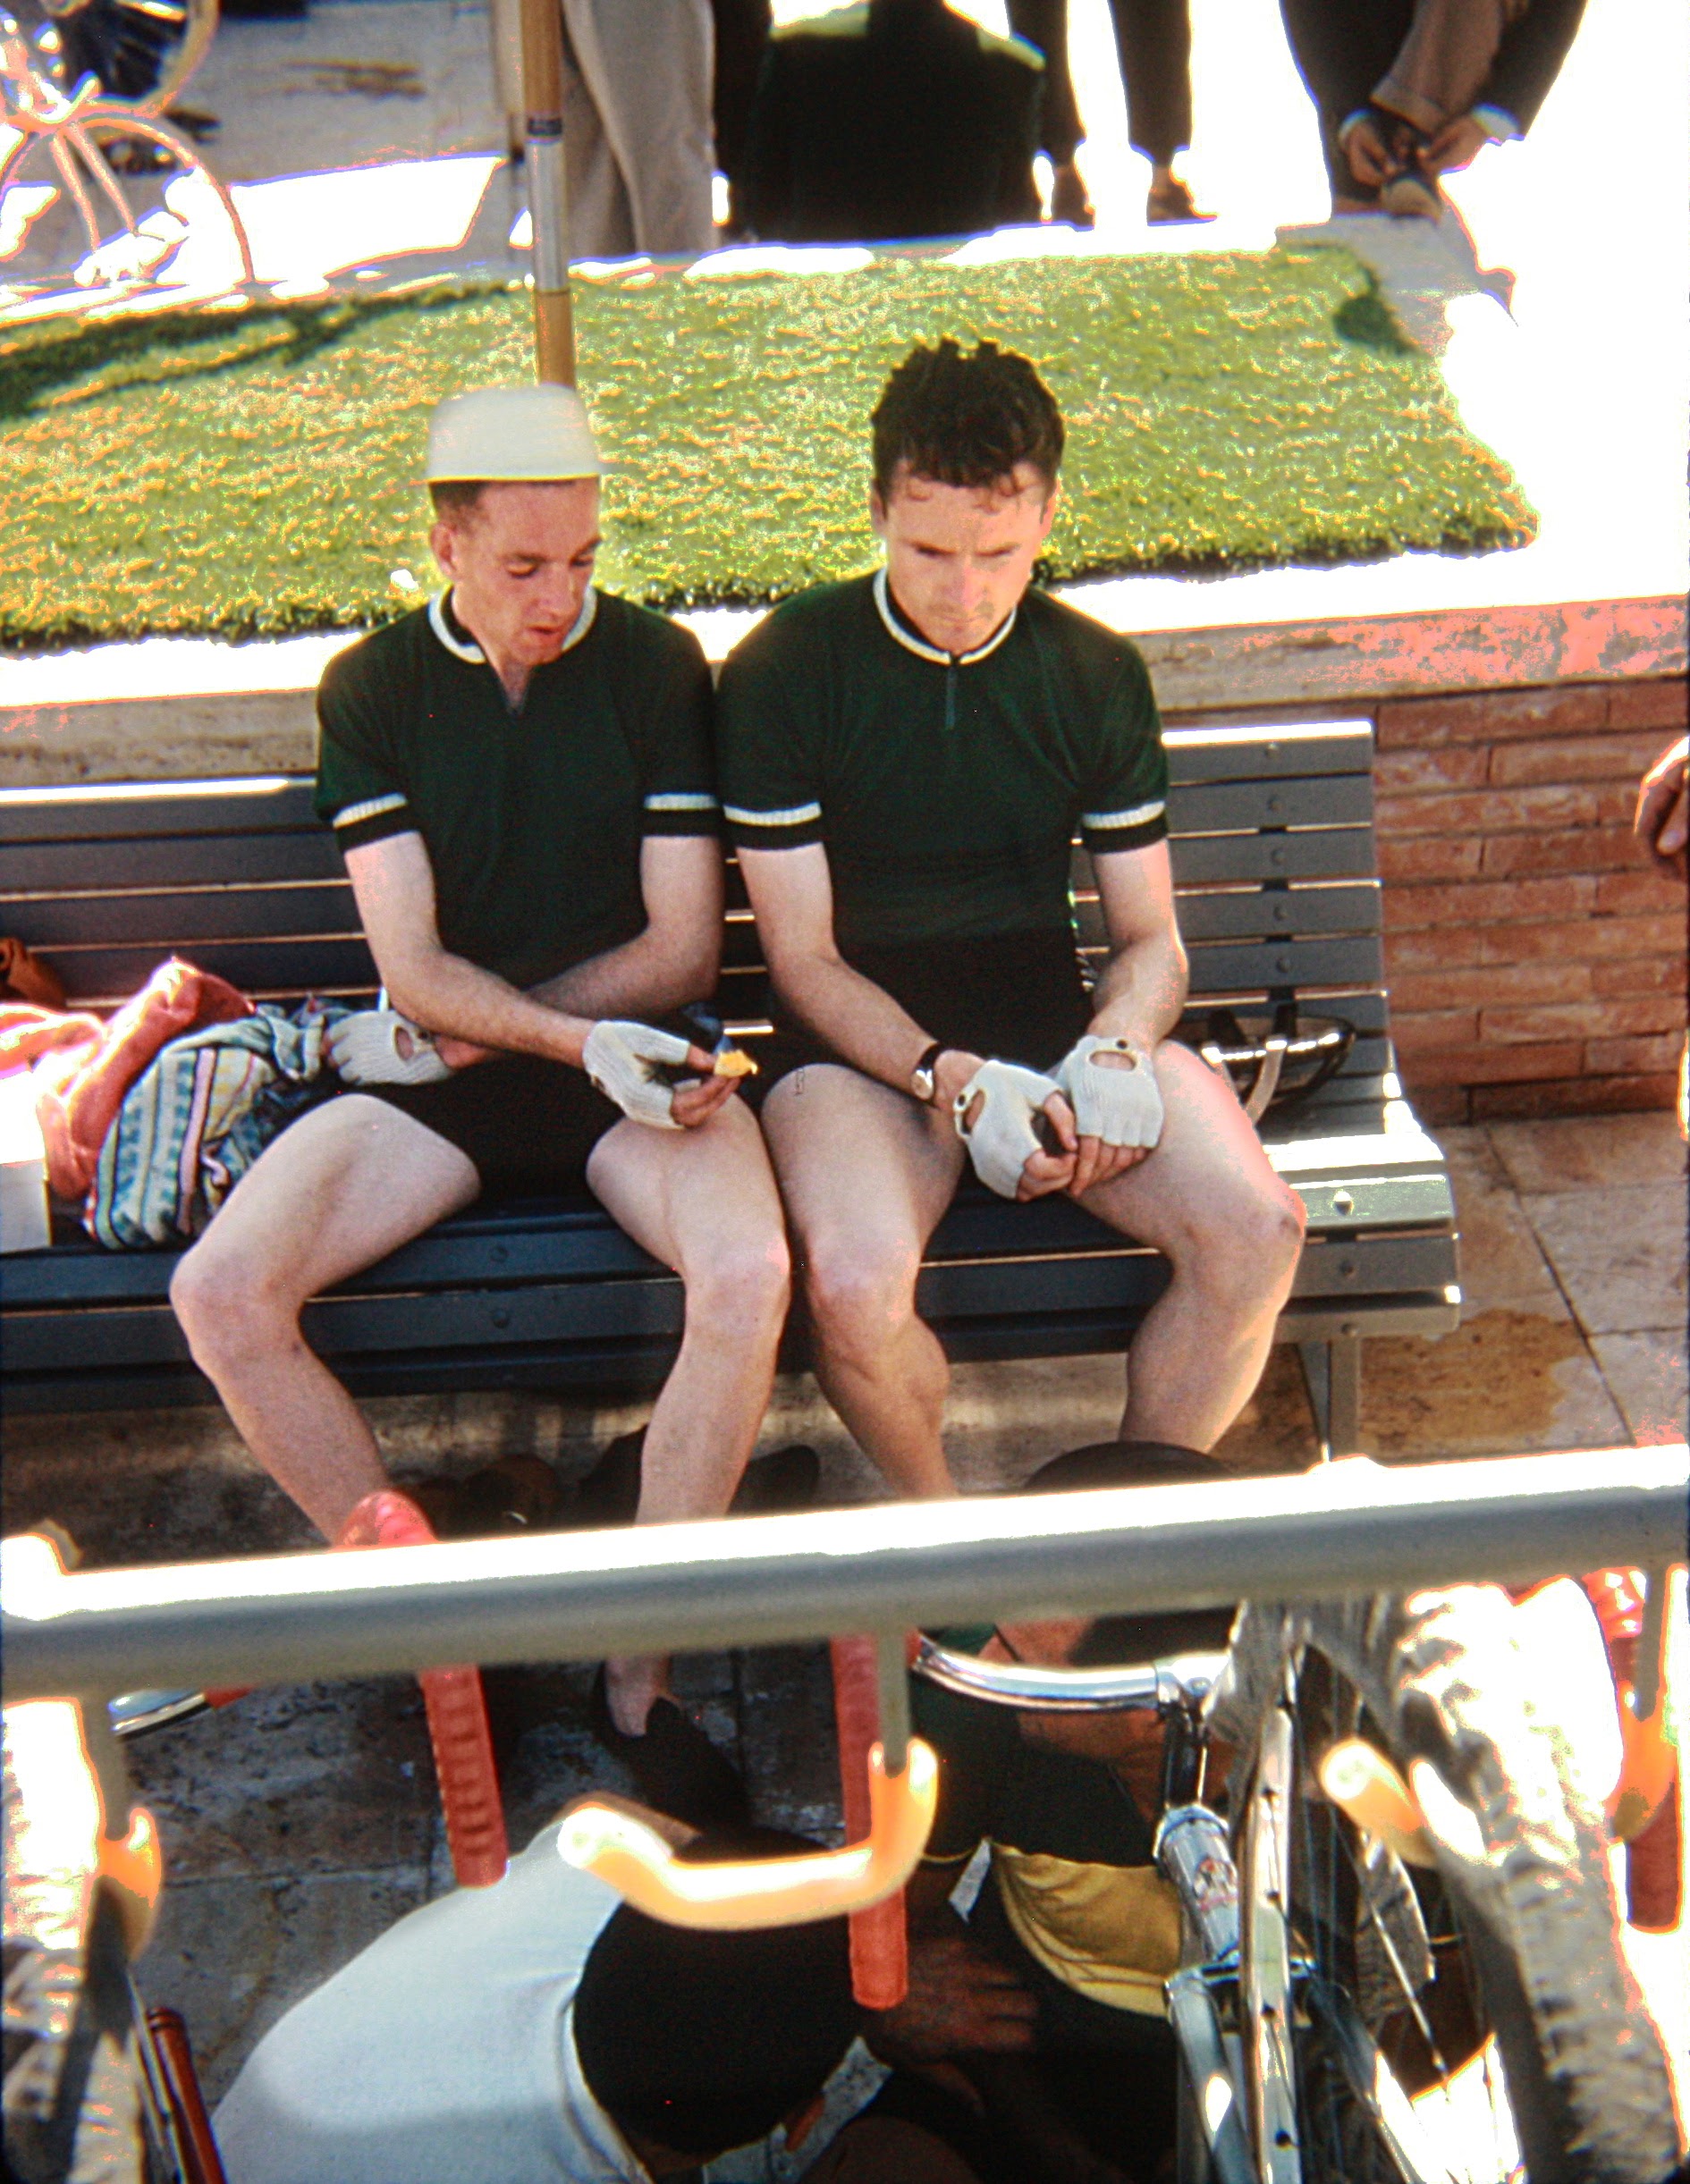 Mick Horgan and Martin McKay keeping out of the sun at the Velodrome. (Photo: © Sean B. Fox)